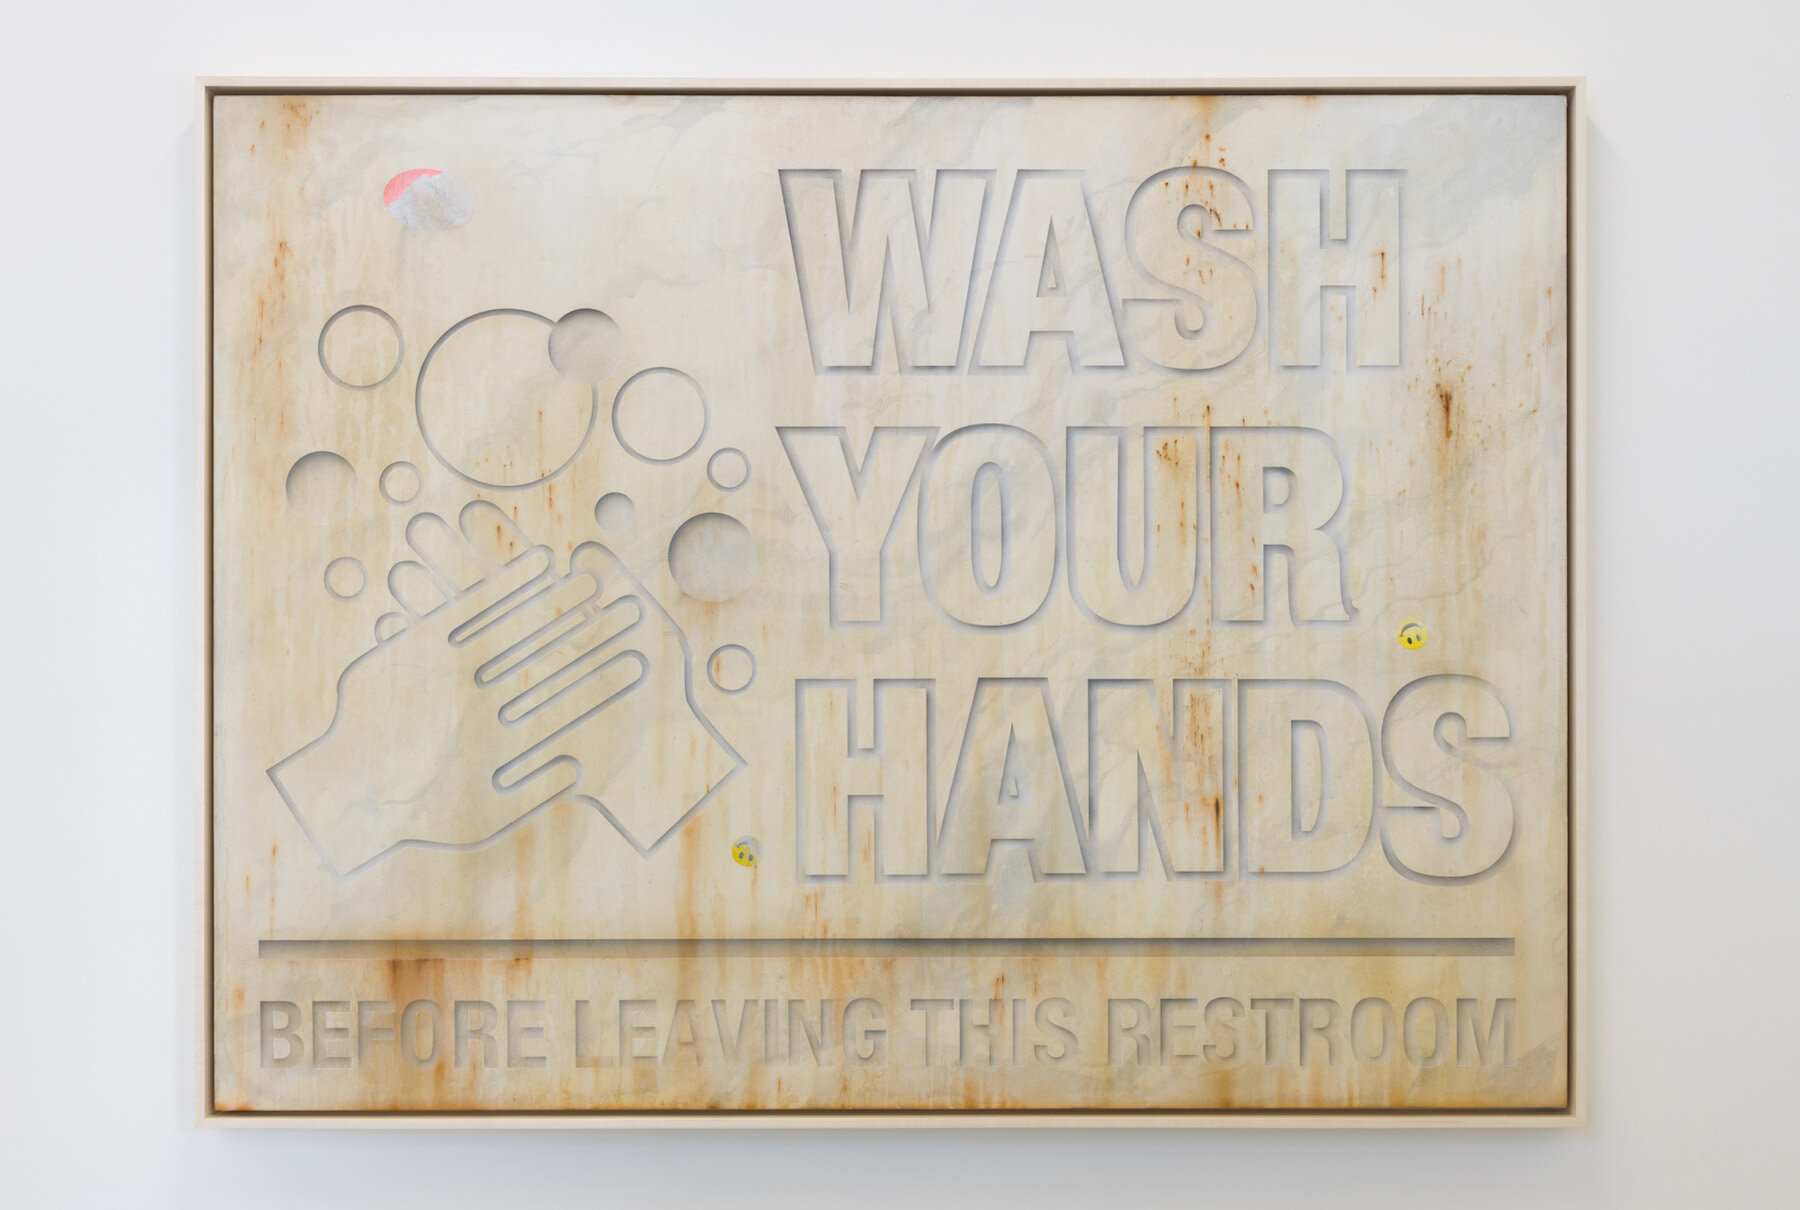   "Wash Your Hands" Carrara Marble , 2017. Acrylic on canvas. 36 x 48 inches 